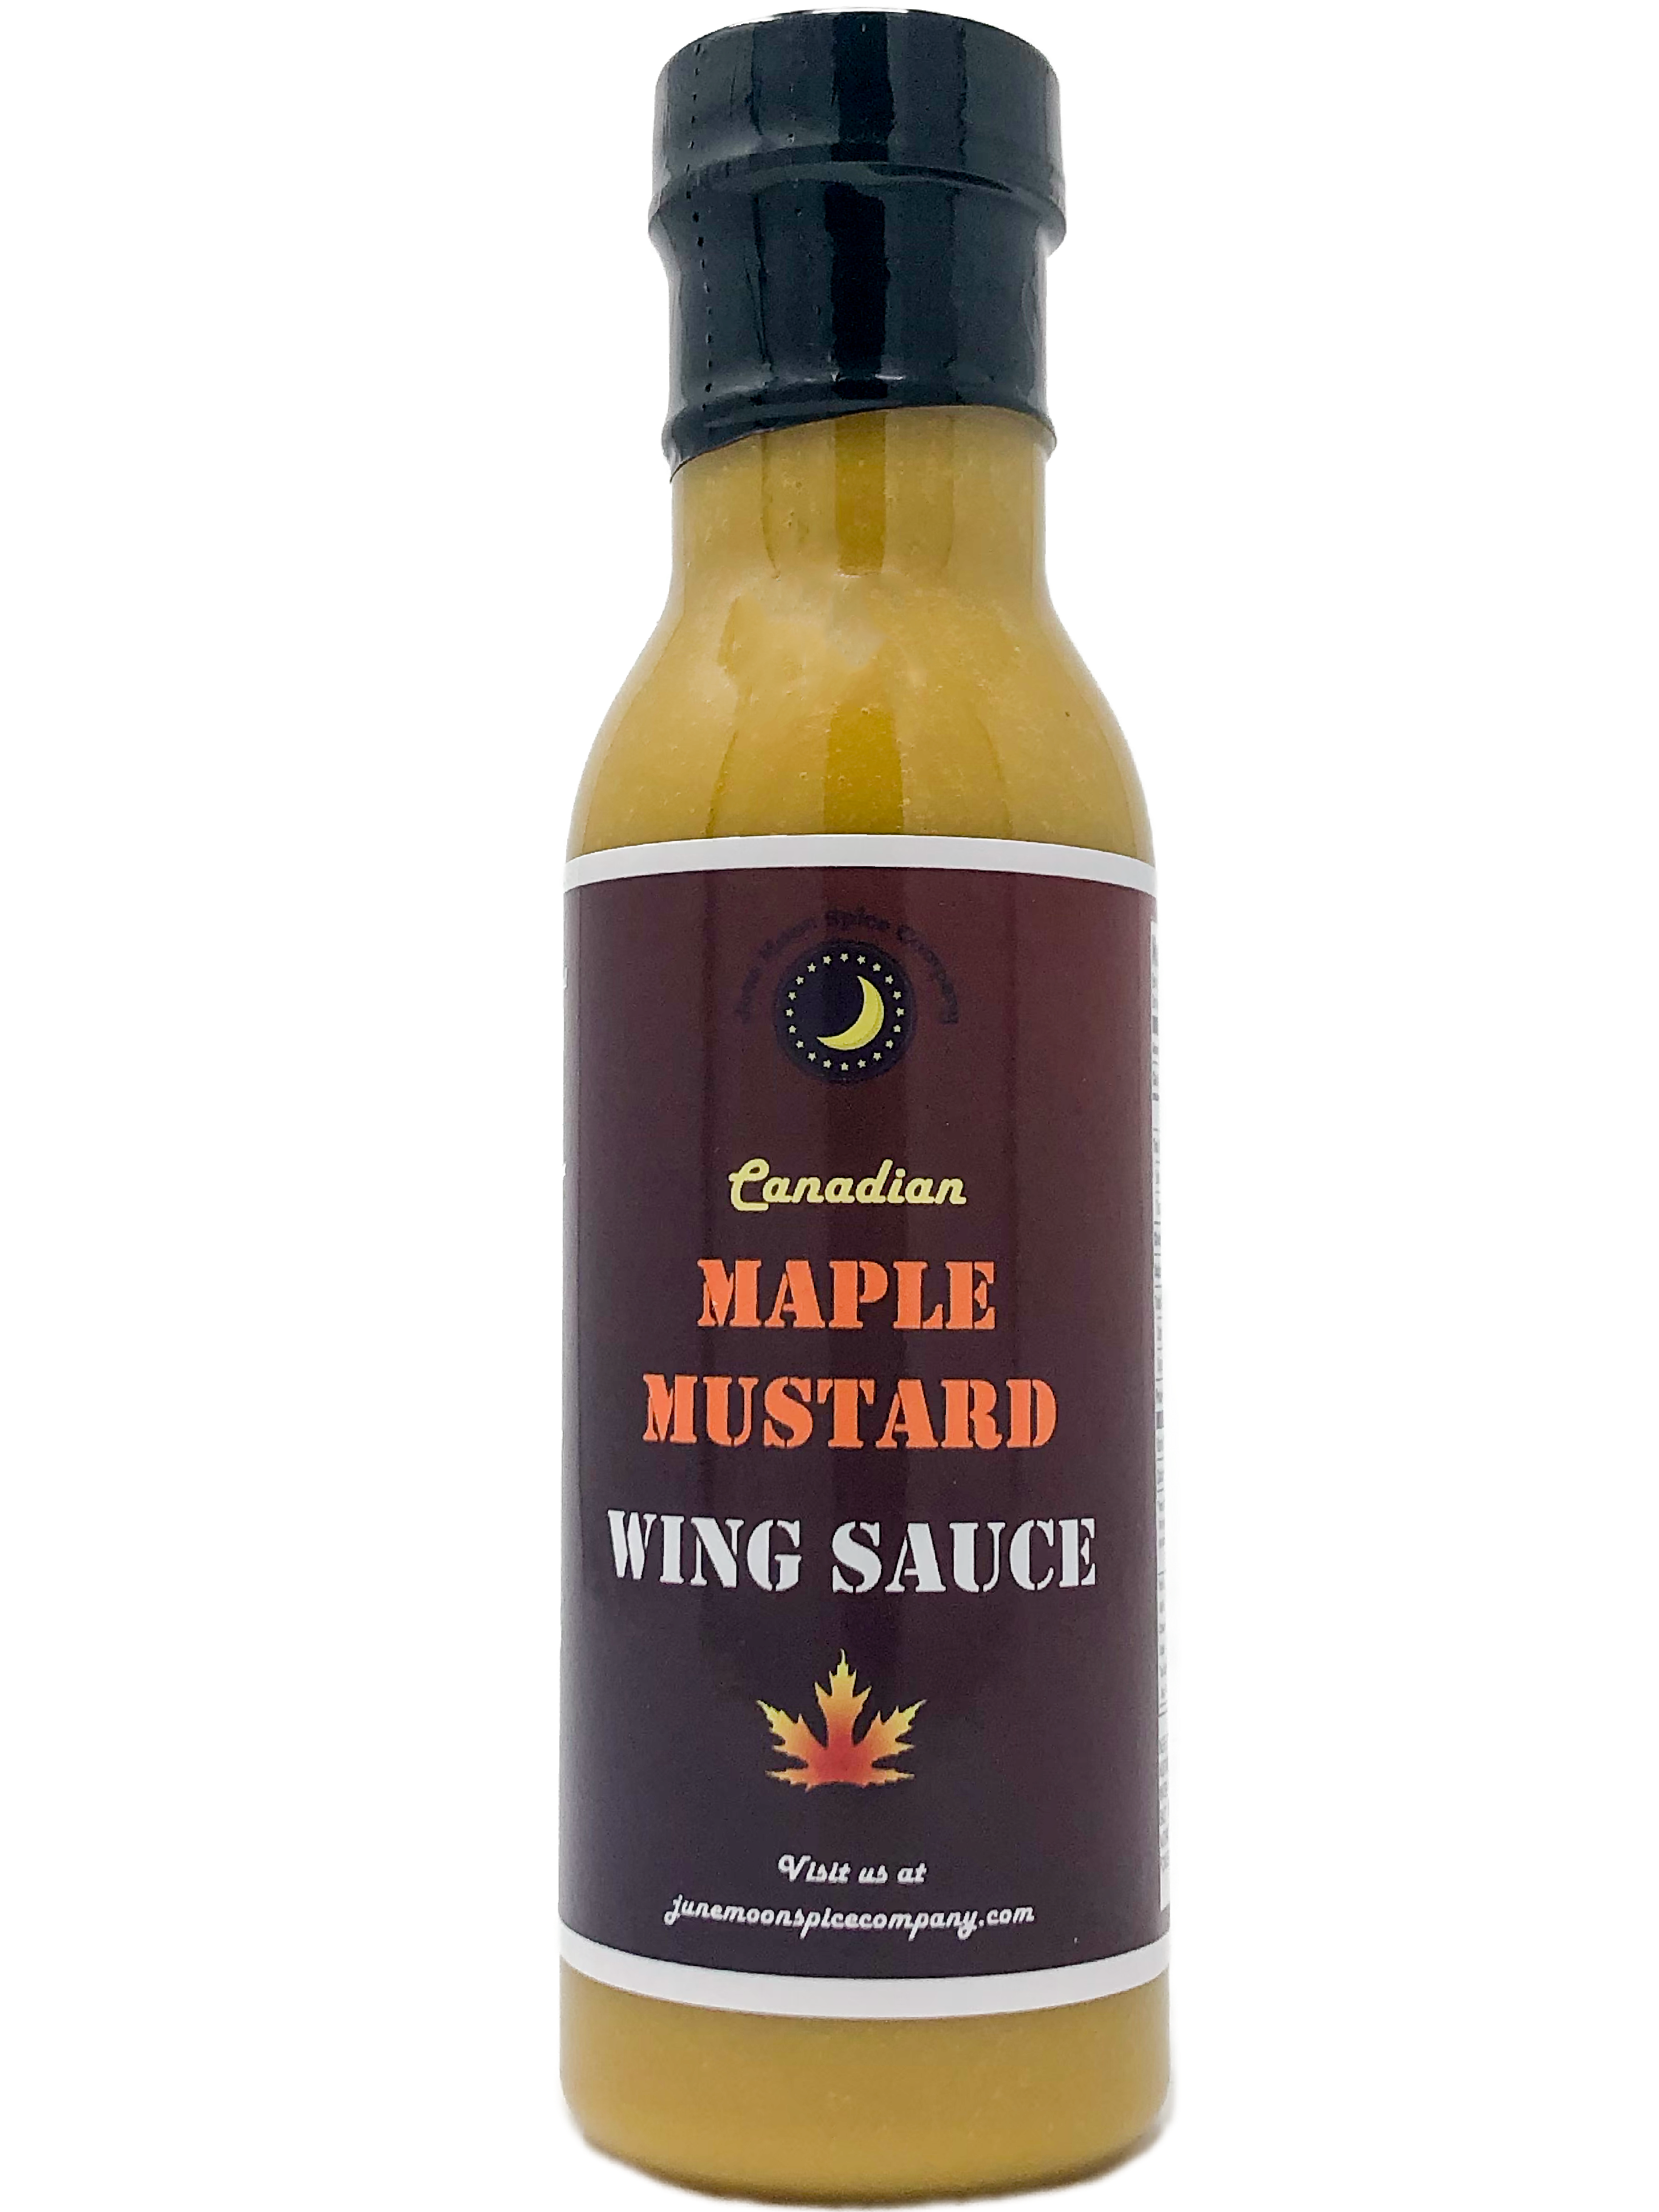 Canadian Maple Mustard Wing Sauce